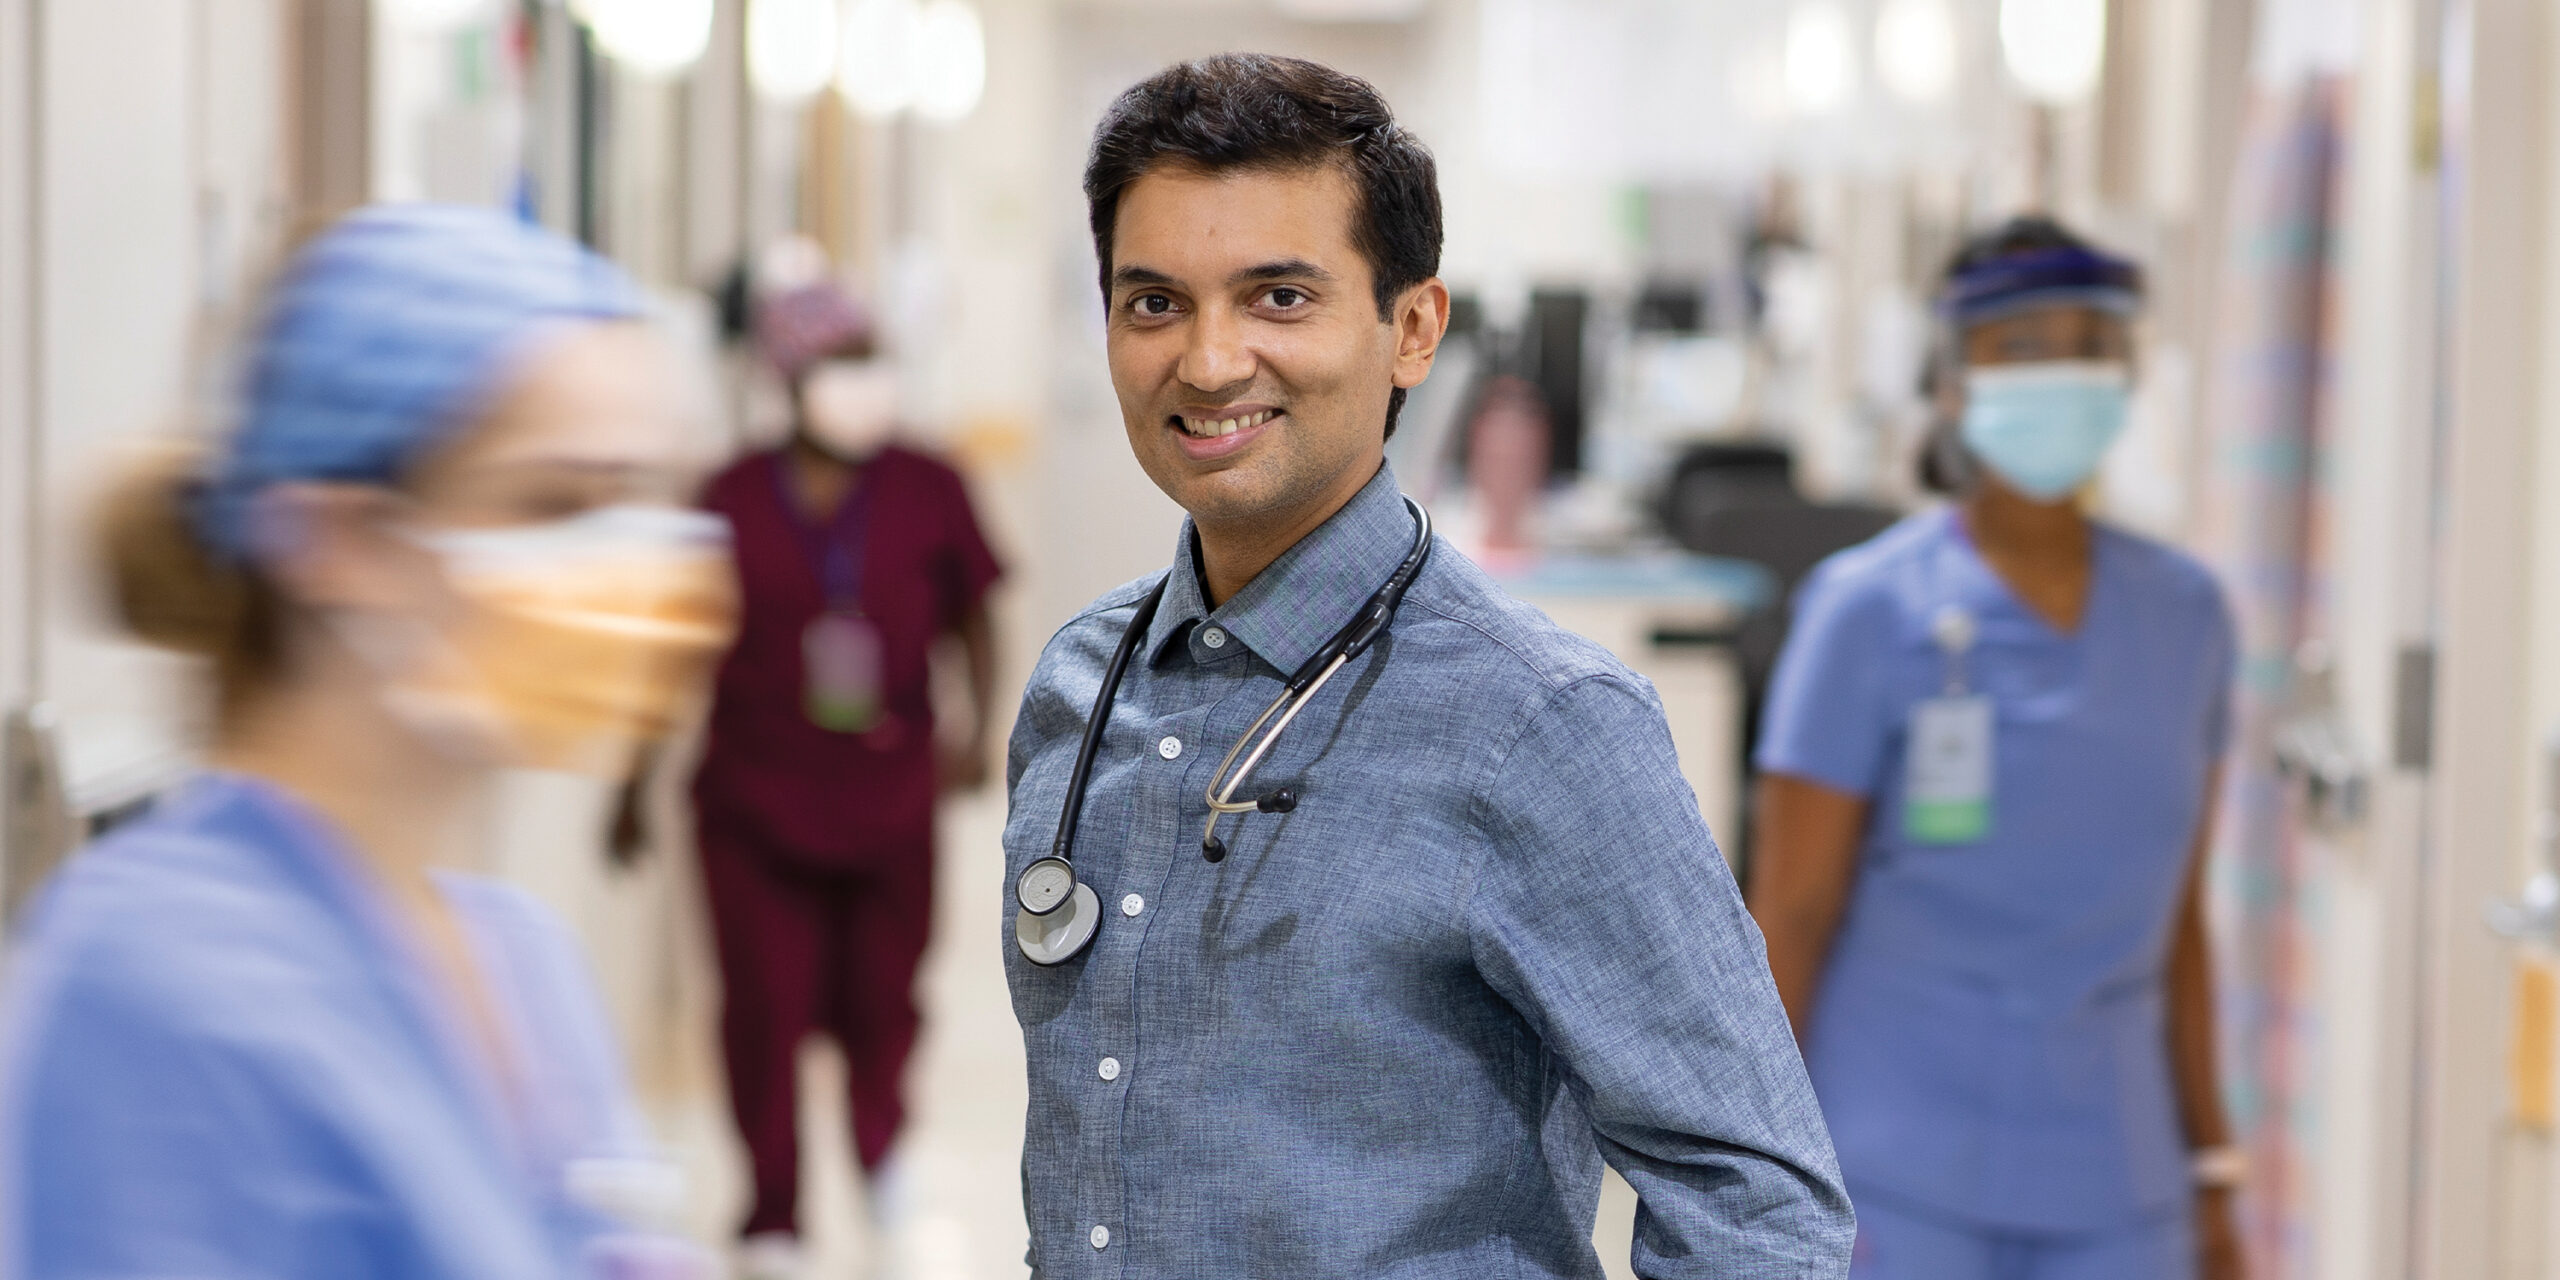 Man in blue shirt with stethoscope with hospital workers in background